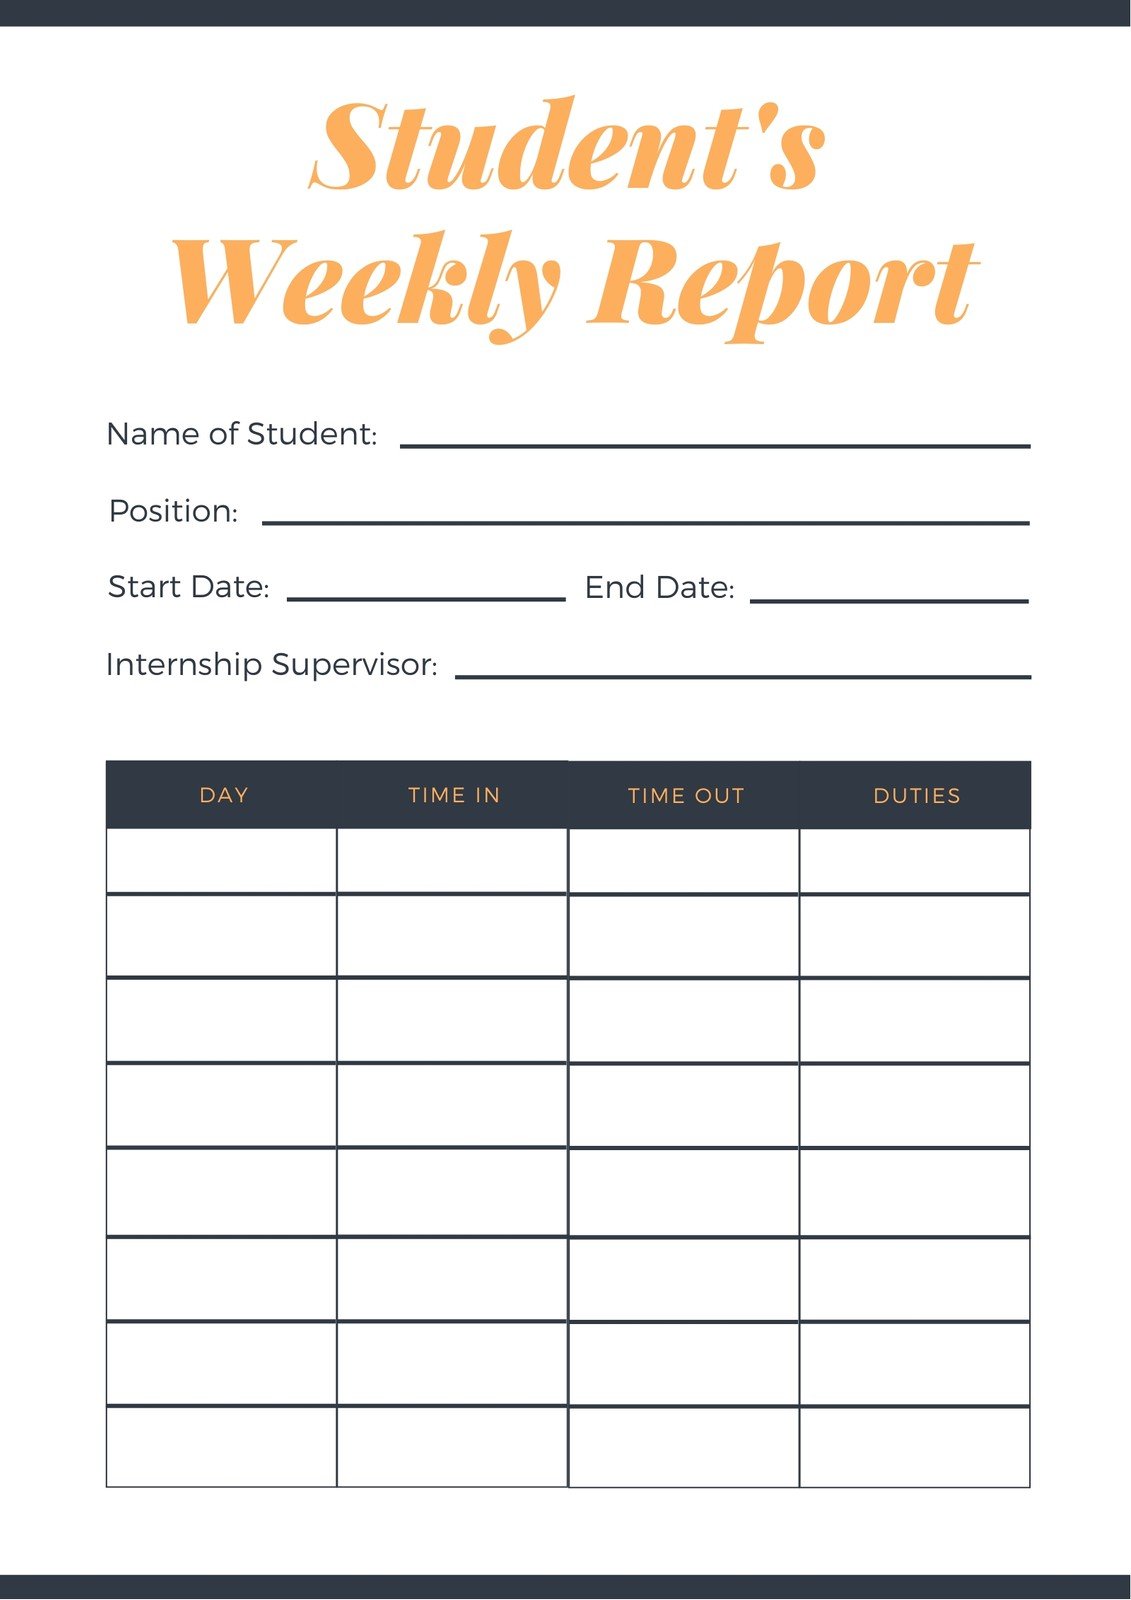 customize-22-weekly-reports-templates-online-canva